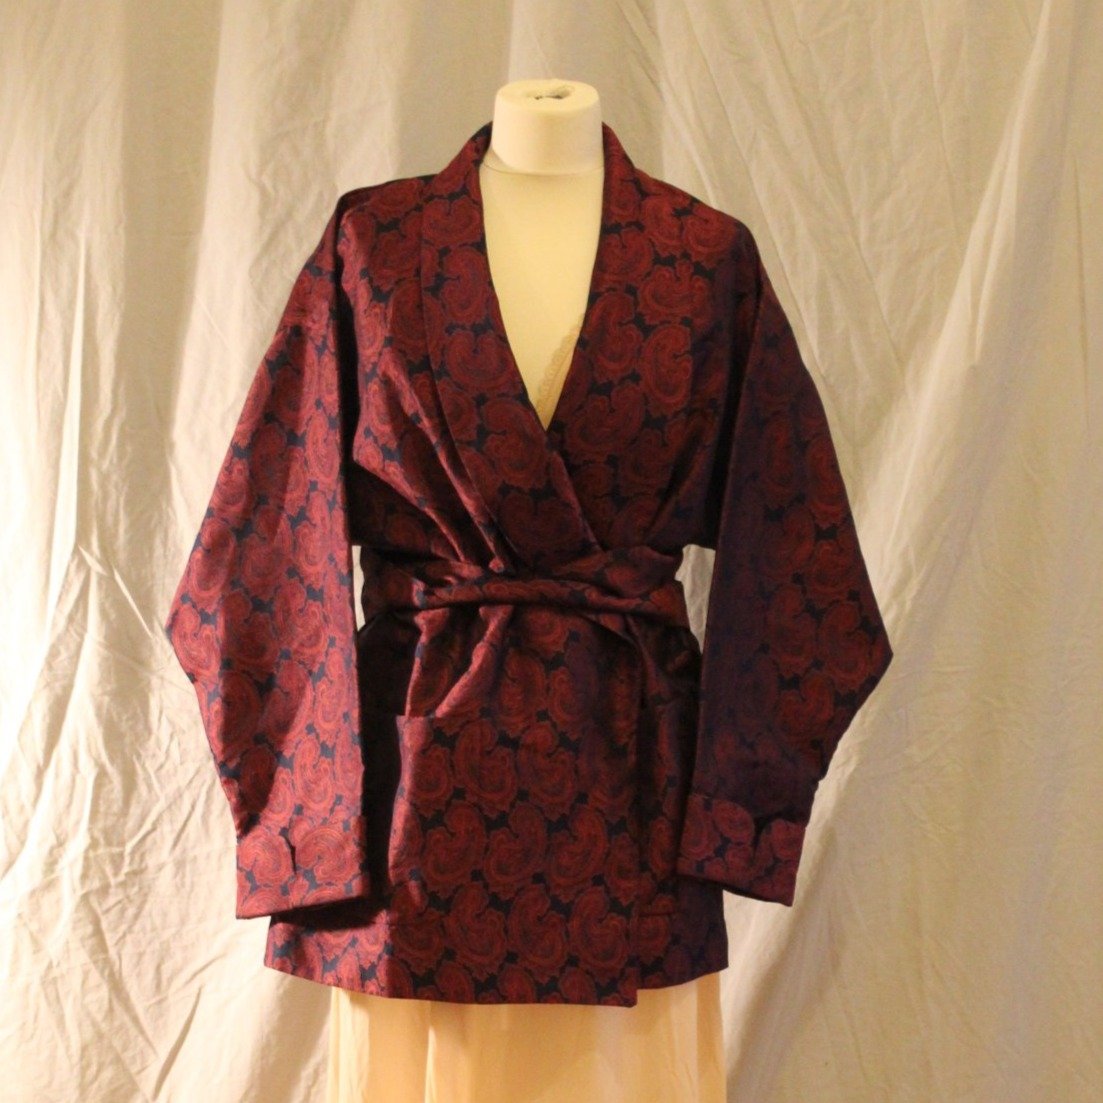 Structured black smoking jacket with wine paisley